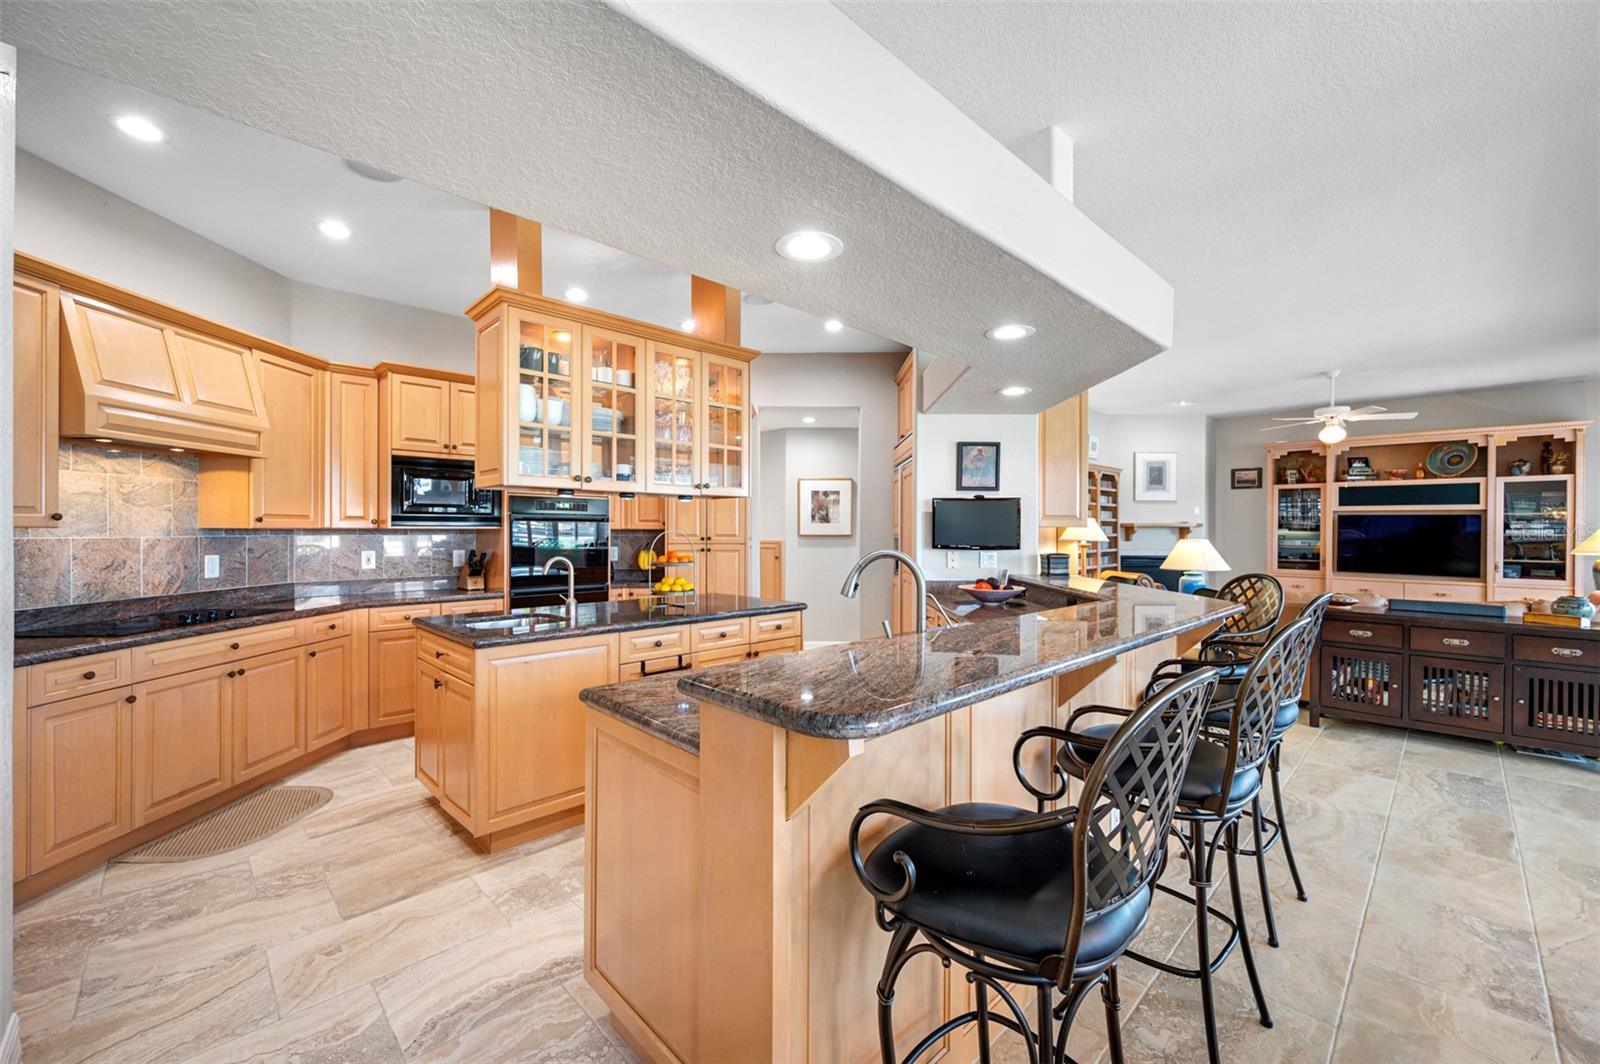 Kitchen with custom wood cabinetry, granite counter tops and backsplash, and expansive breakfast bar